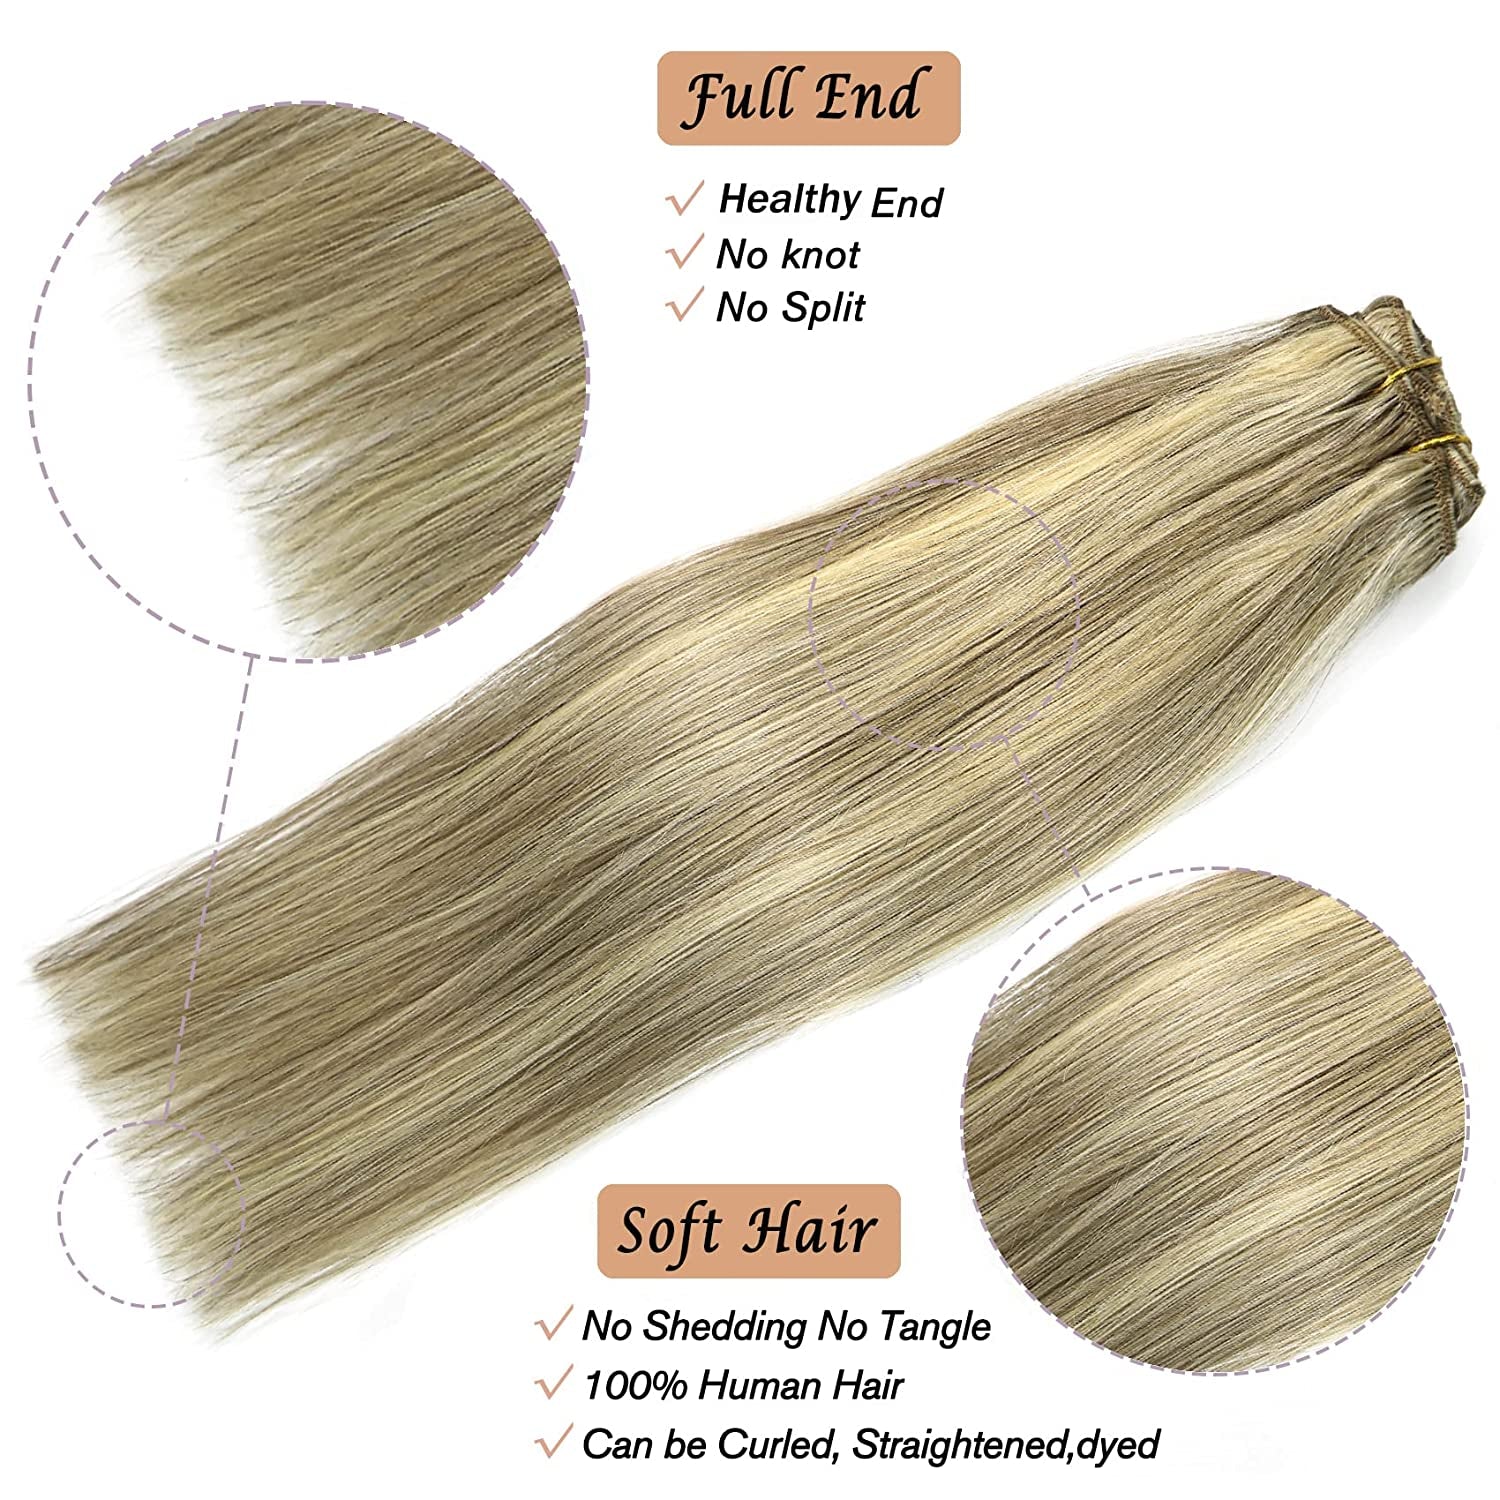 Clip in Hair Extensions Real Human Hair,  Real Human Hair Balayage Hair Extensions Mixed Bleach Blonde 12Inch 70G 7Pcs Straight Silky Blonde Hair Extensions for Women Natural Hair(12"#18613)